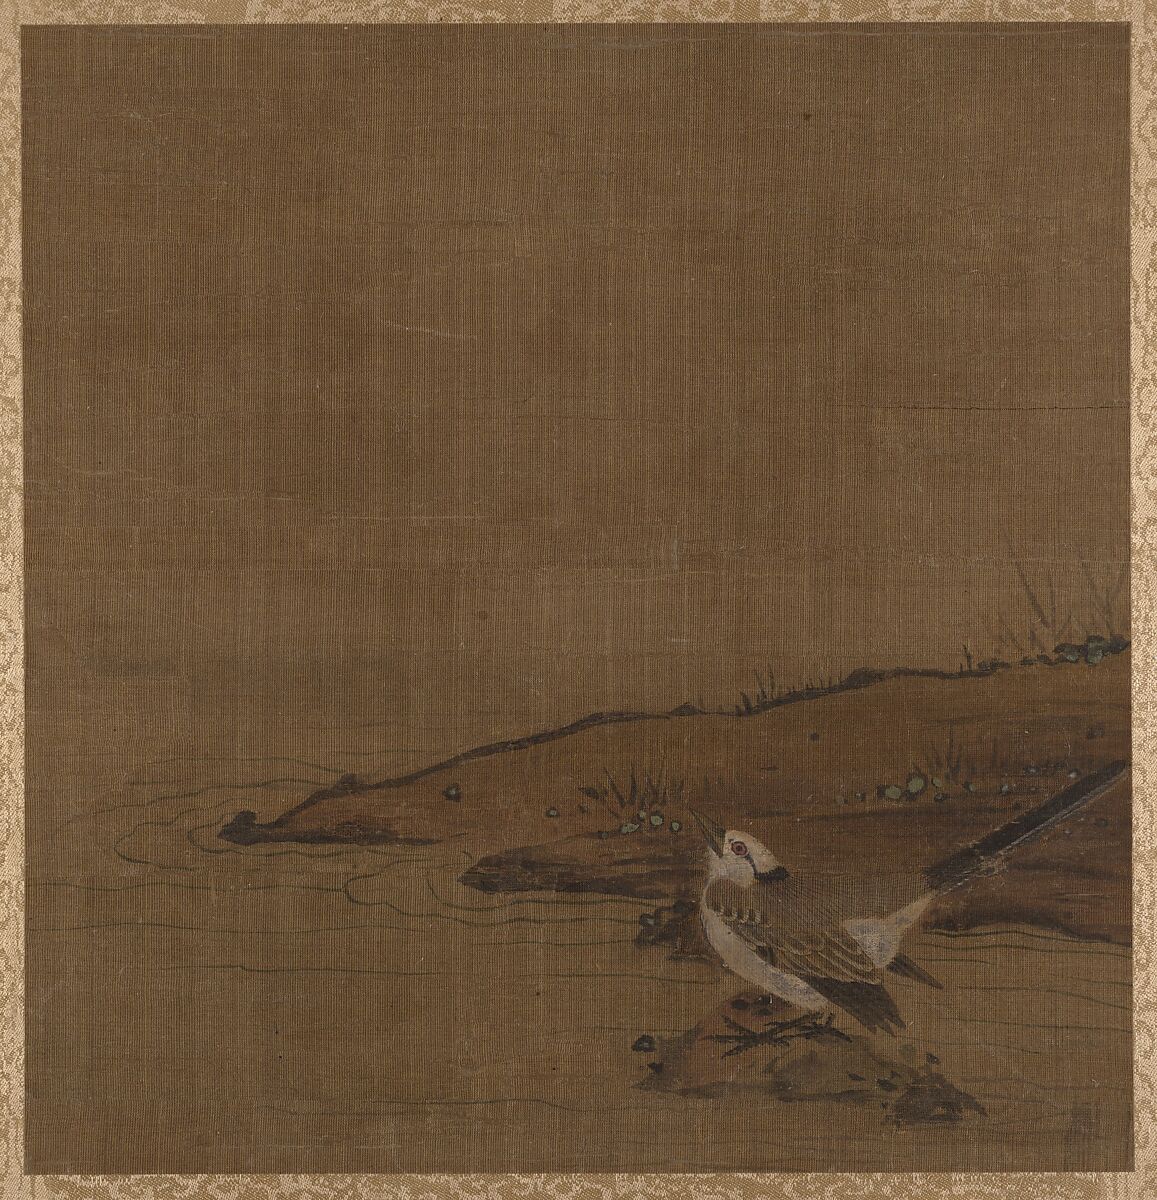 Bird Near Water (from Album of Studies by Modern Artists, no. 62), Unidentified artist, Albun leaf; ink and color on silk, China 